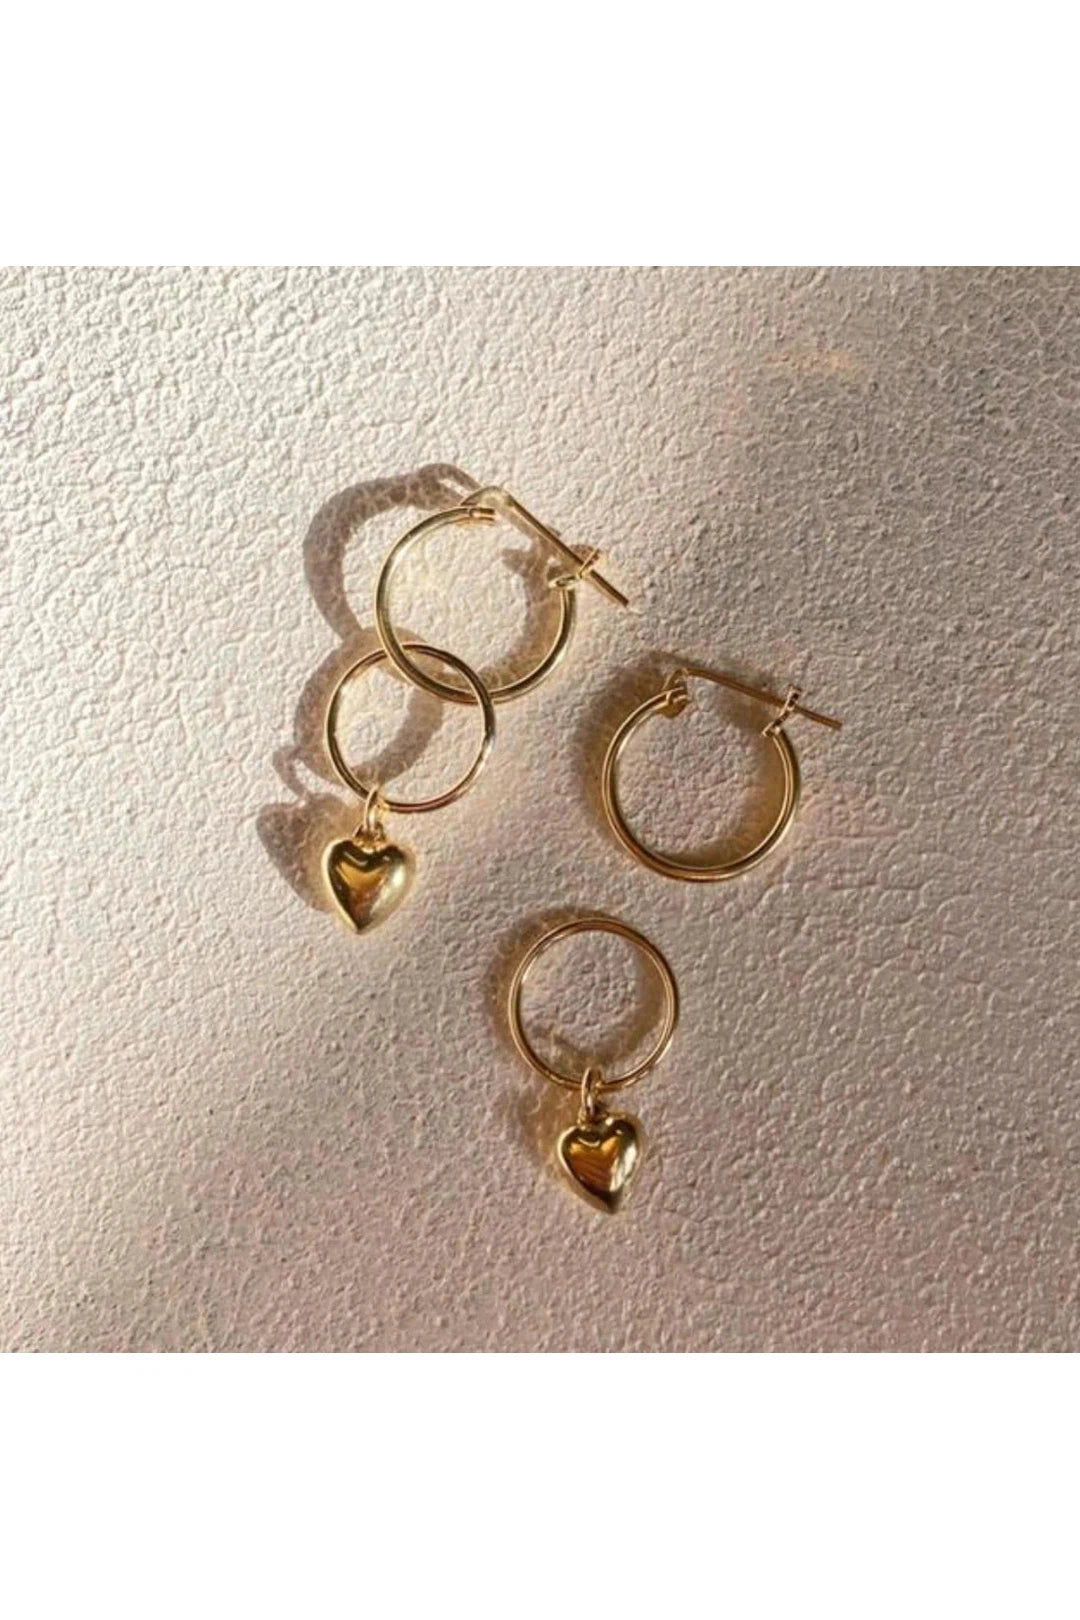 Double ring heart hoops, gold